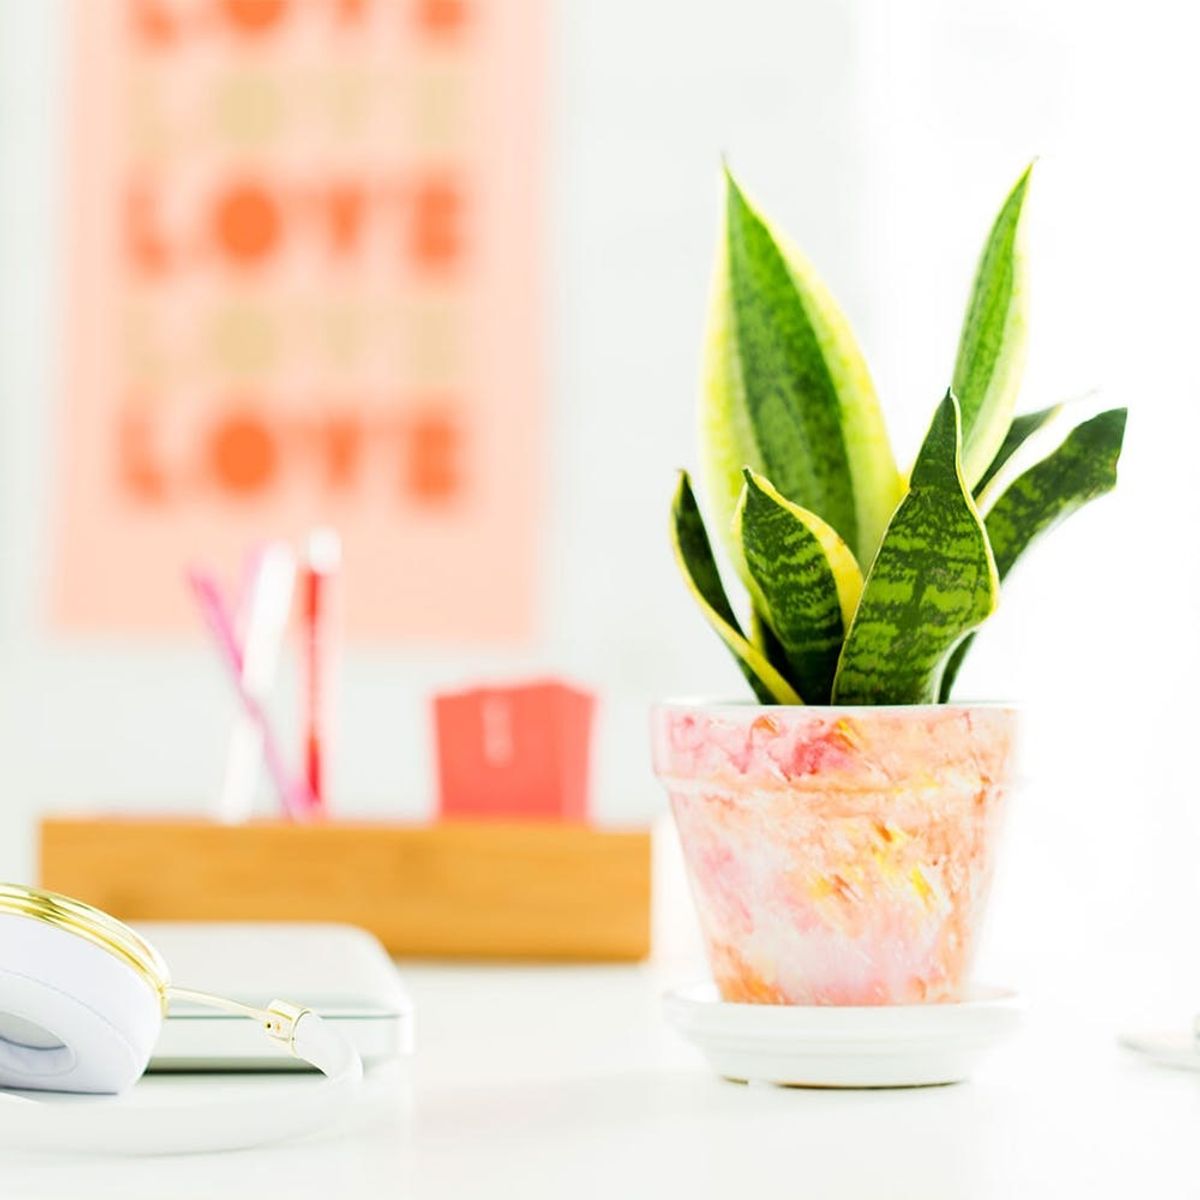 Make This Easy Sharpie Watercolor Planter for Your Office